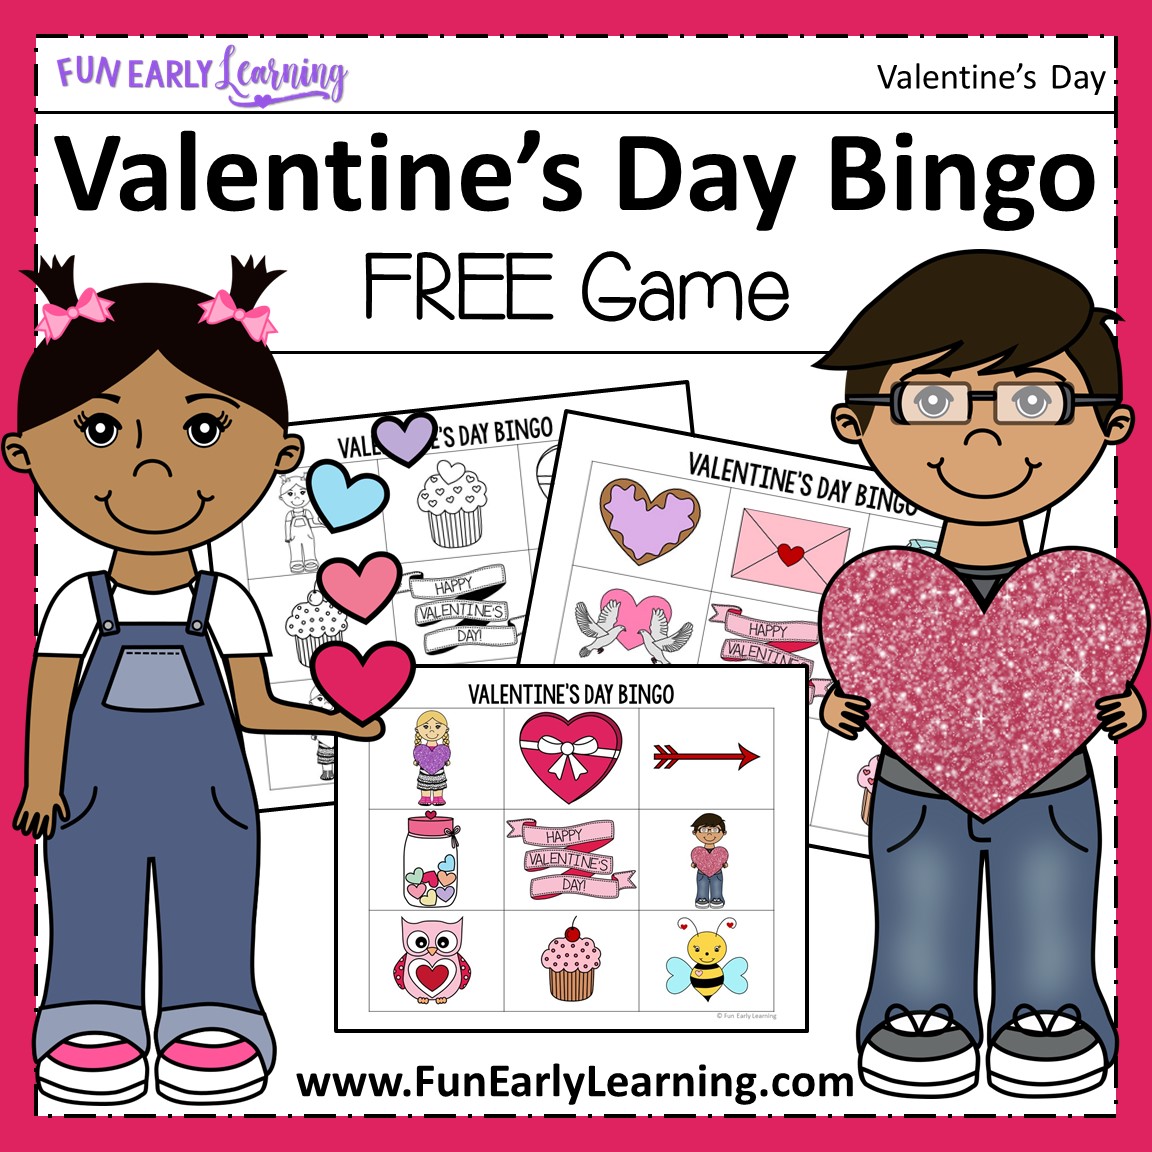 Valentines Day Crafts for Preschoolers - Frosting and Glue- Easy crafts,  games, recipes, and fun